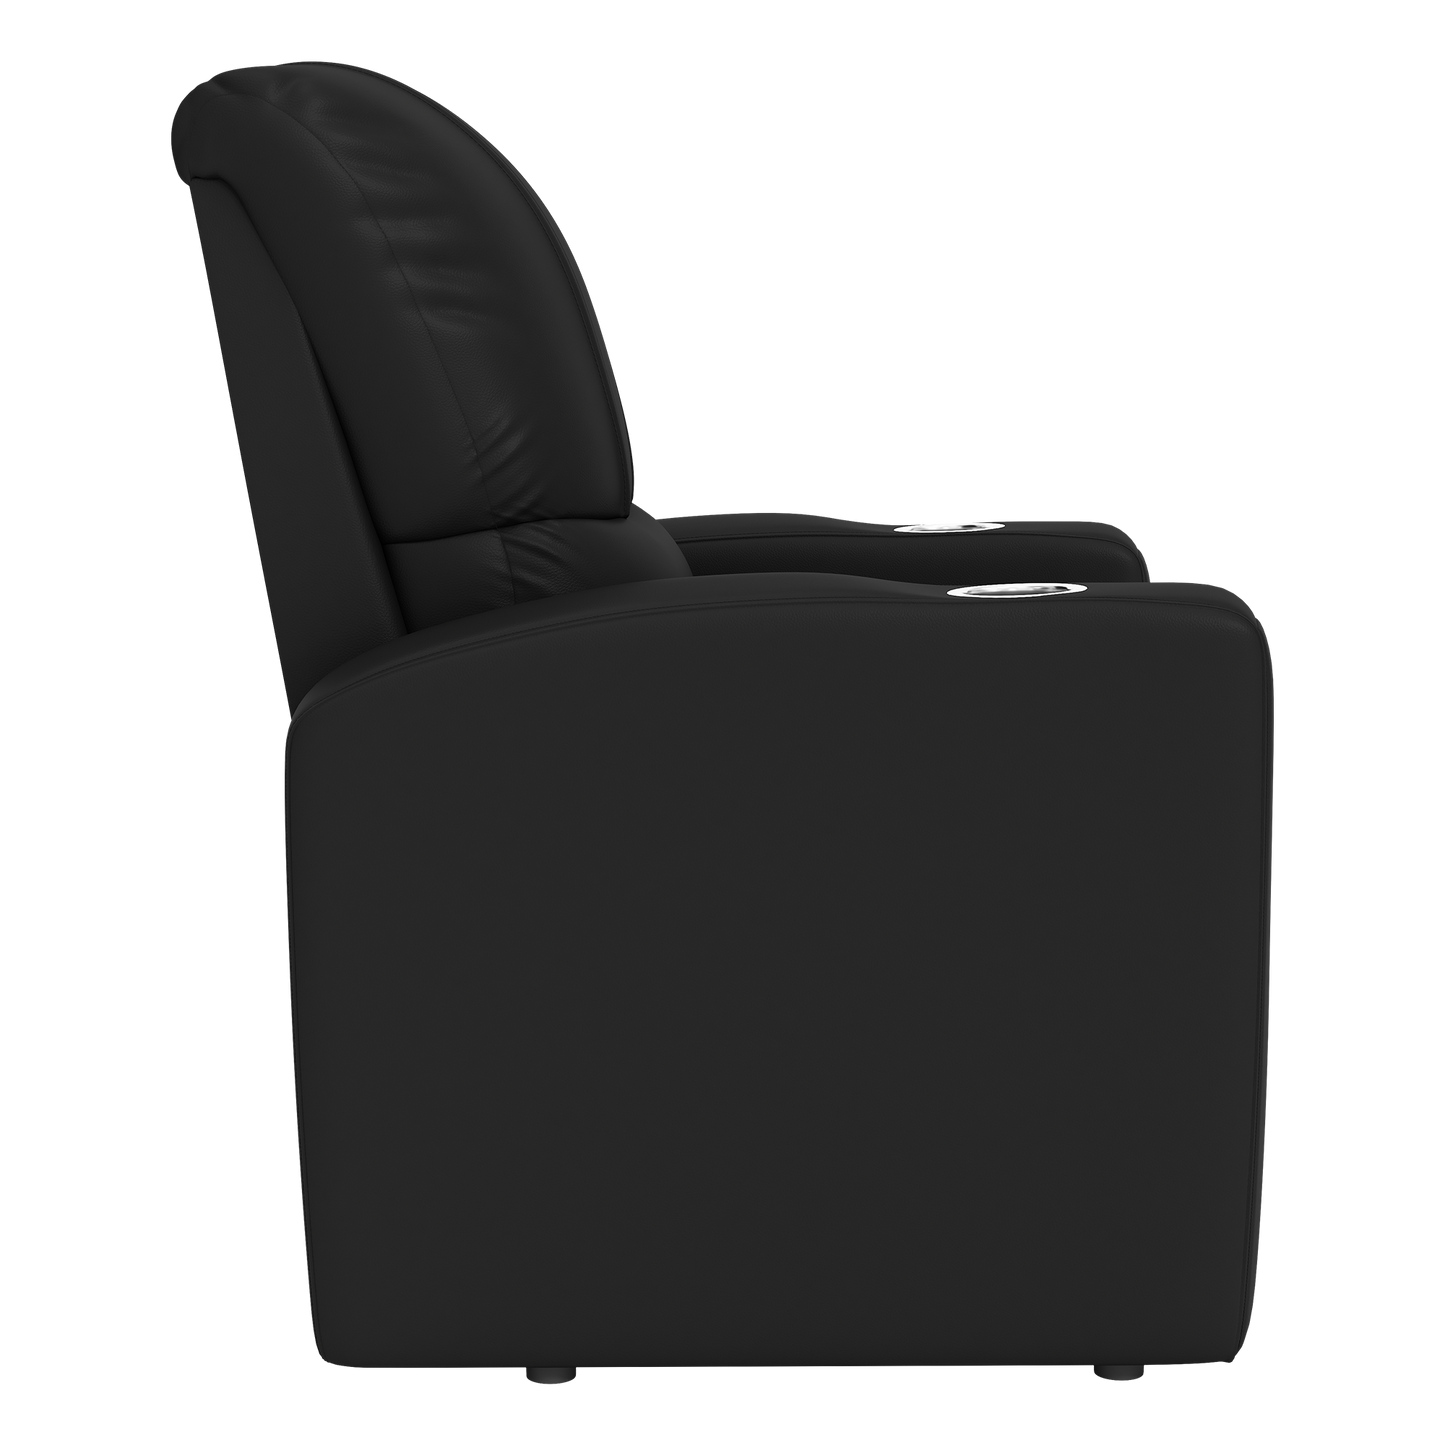 Stealth Recliner with Maine Black Bears Logo